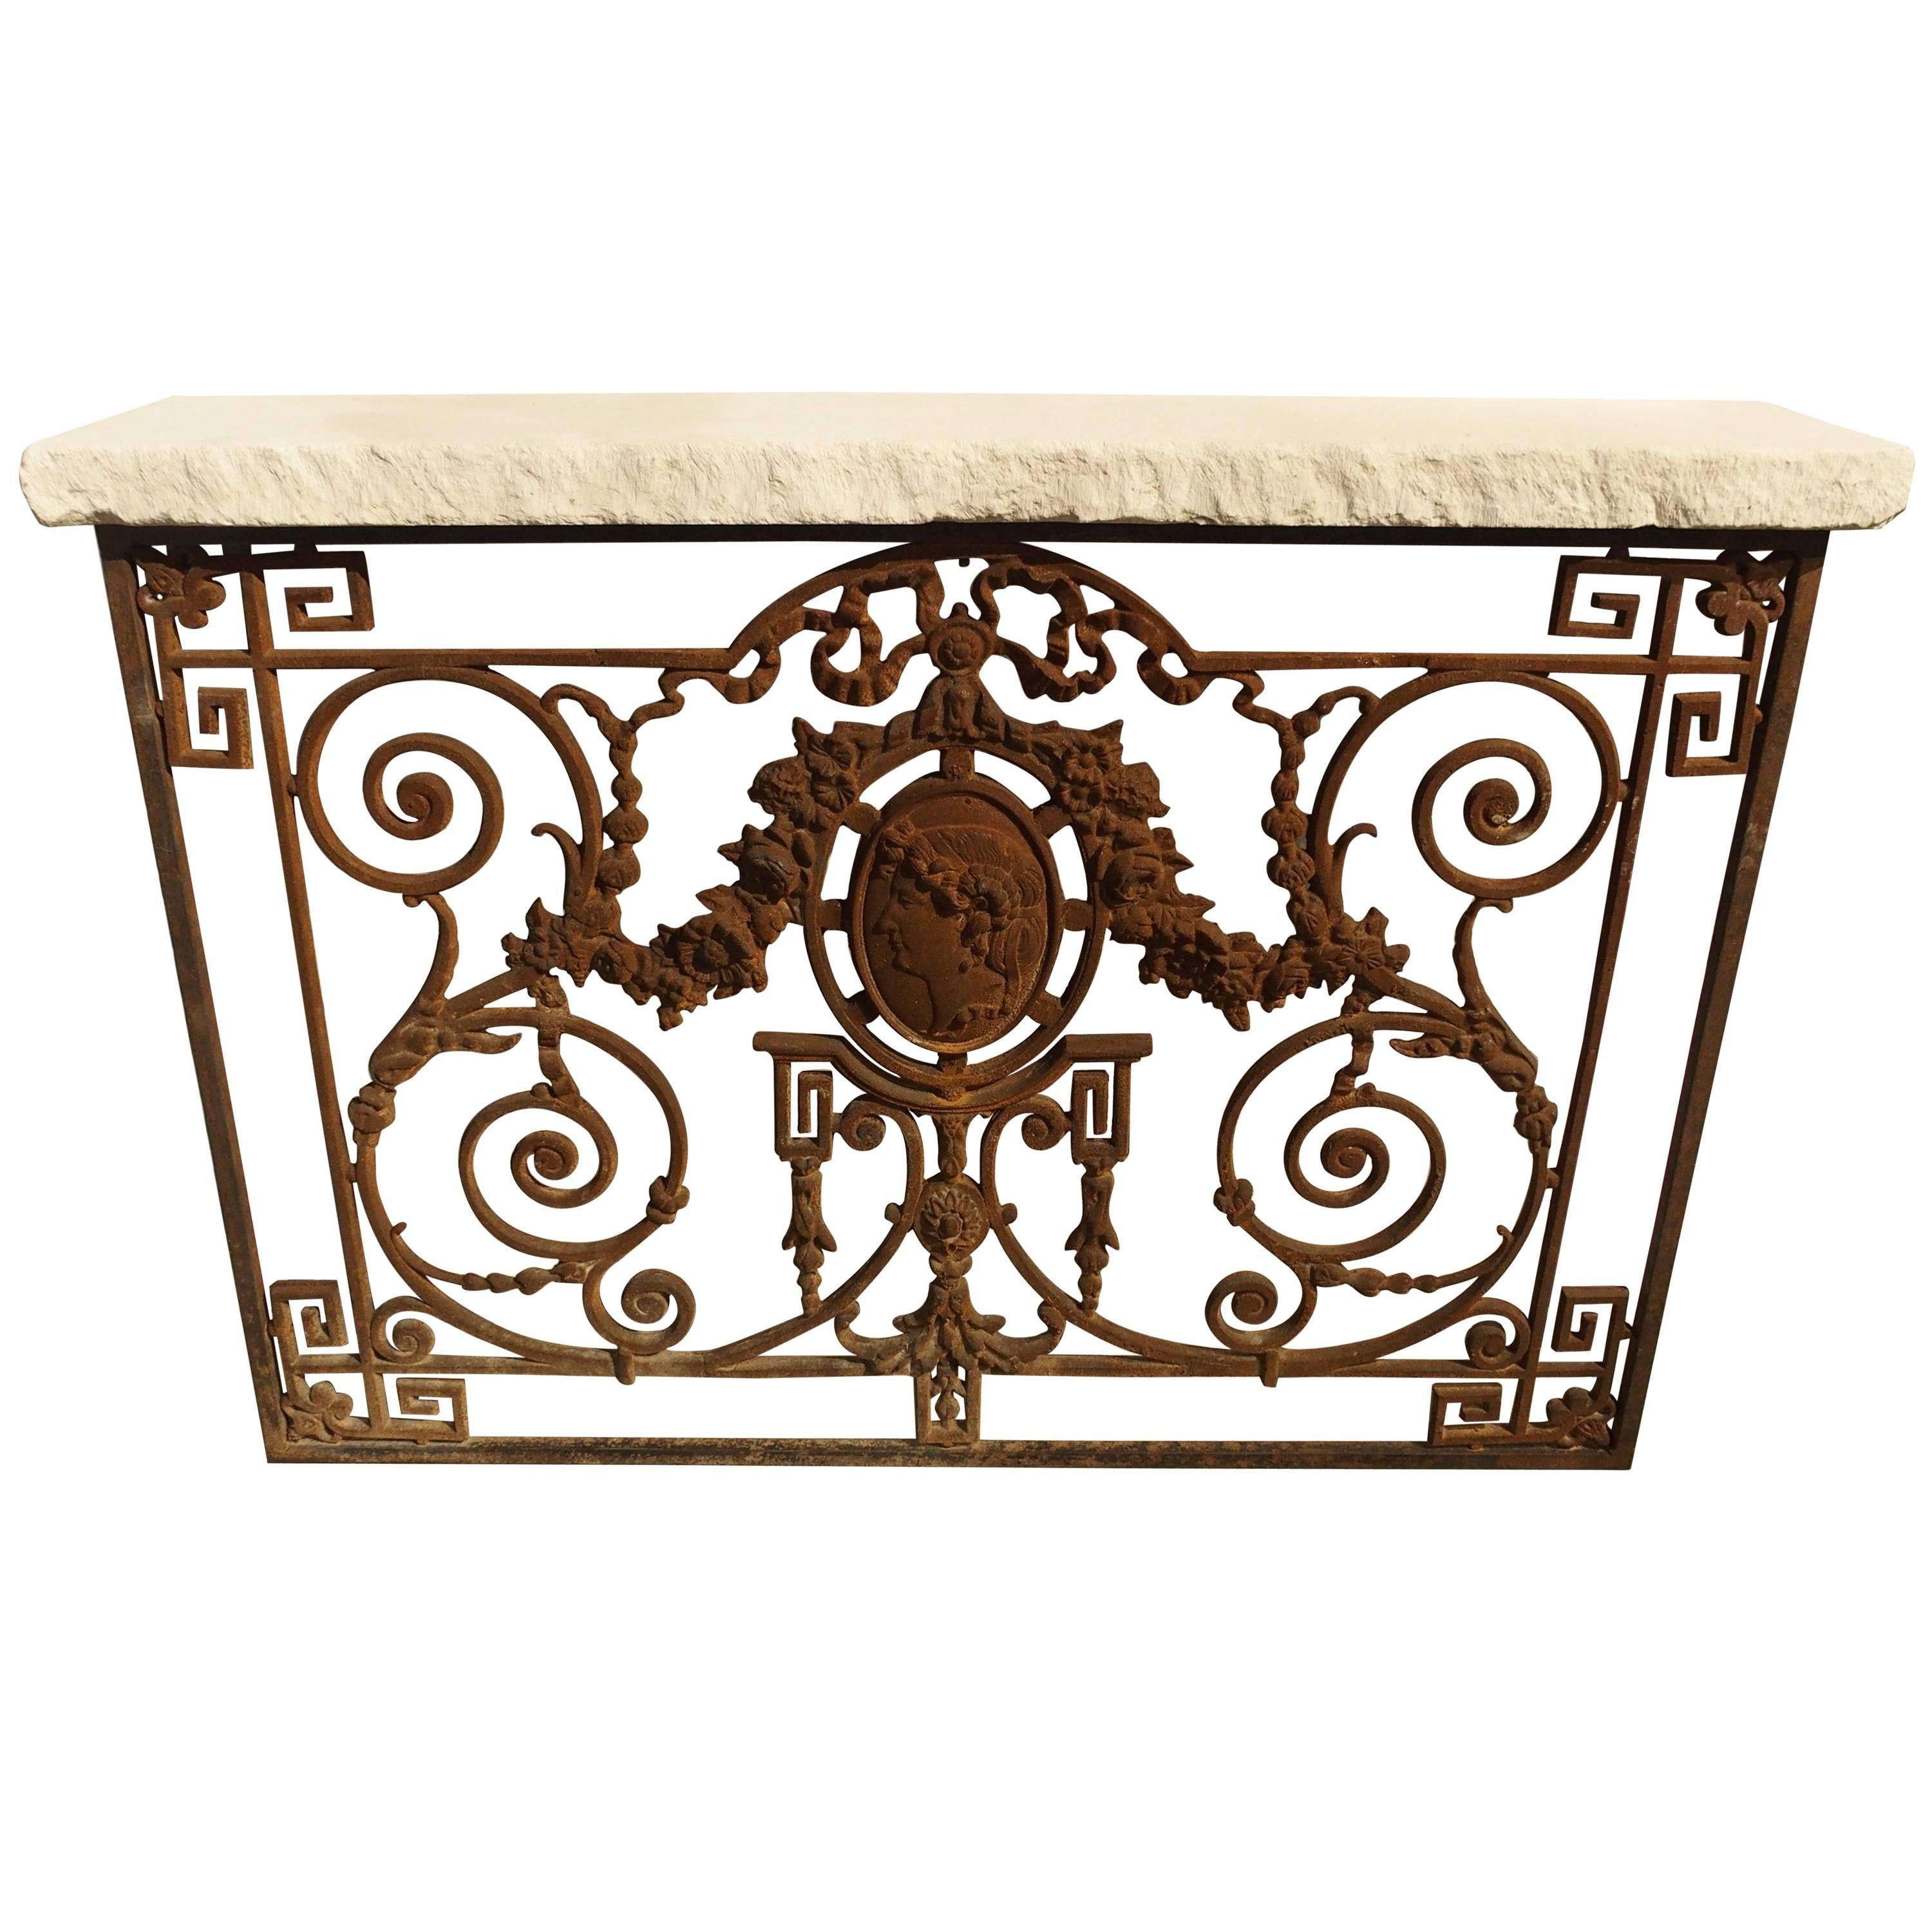 Cast Iron Gate Console Table with Limestone Top from France